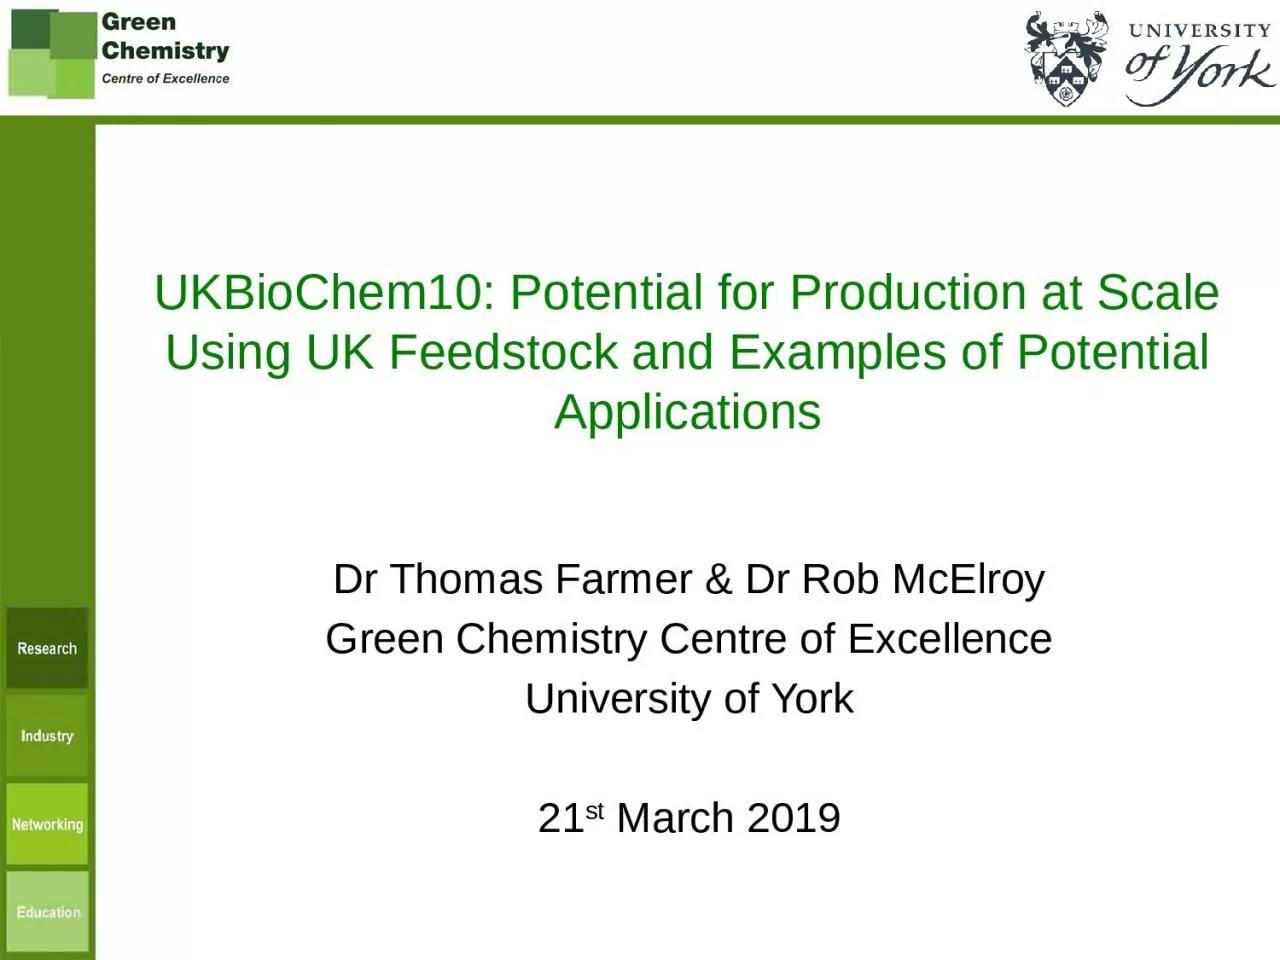 UKBioChem10: Potential for Production at Scale Using UK Feedstock and Examples of Potential